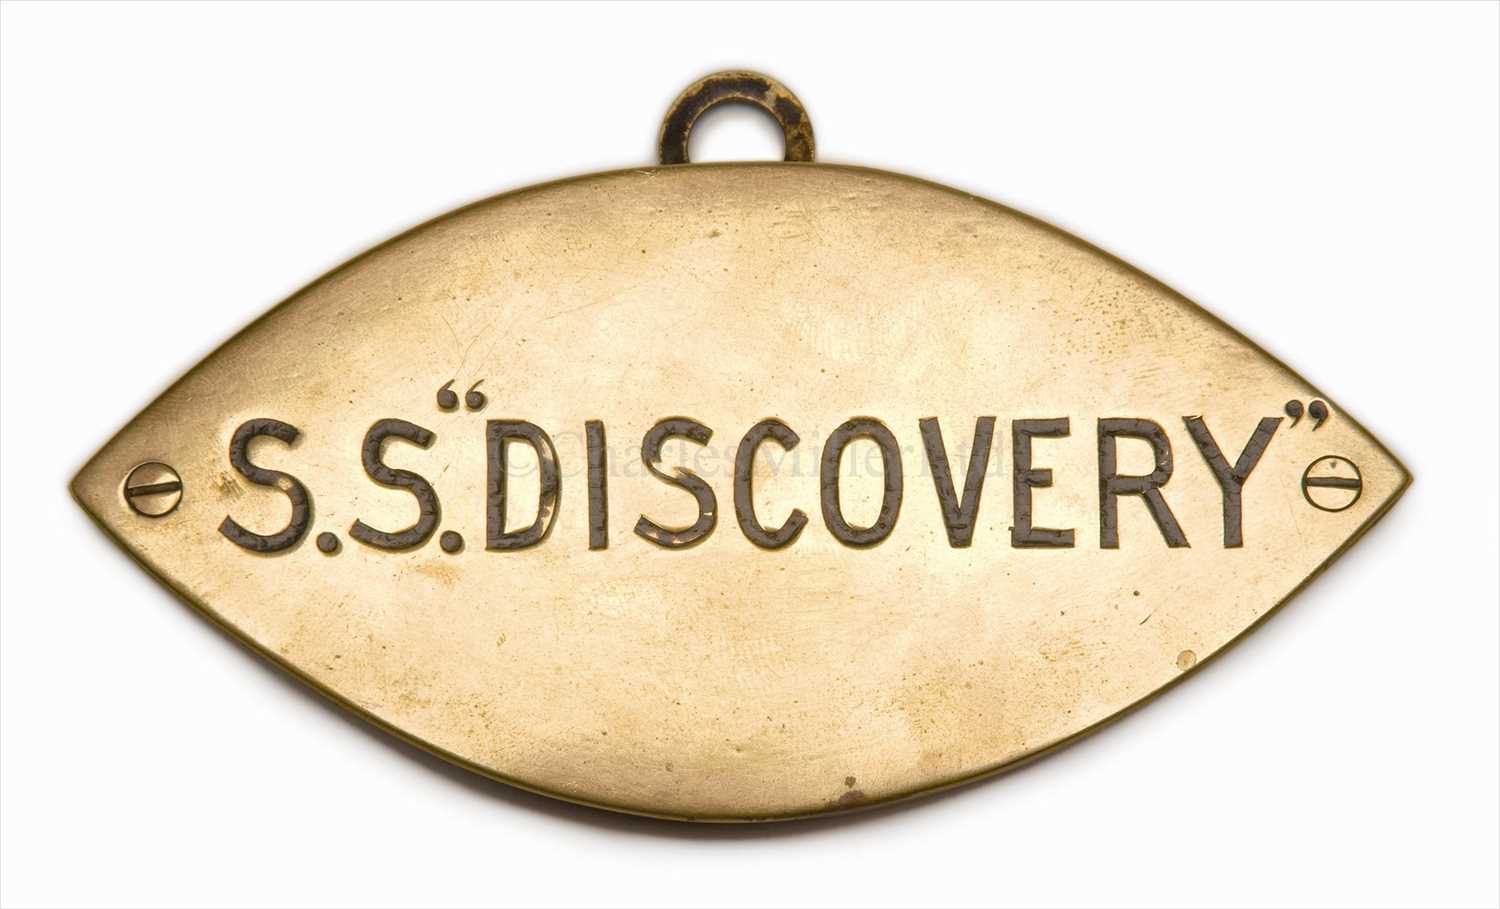 Lot 59 - [CAPTAIN ROBERT FALCON SCOTT] S.S. DISCOVERY: A BRASS LIFEBOAT PLATE, CIRCA 1901